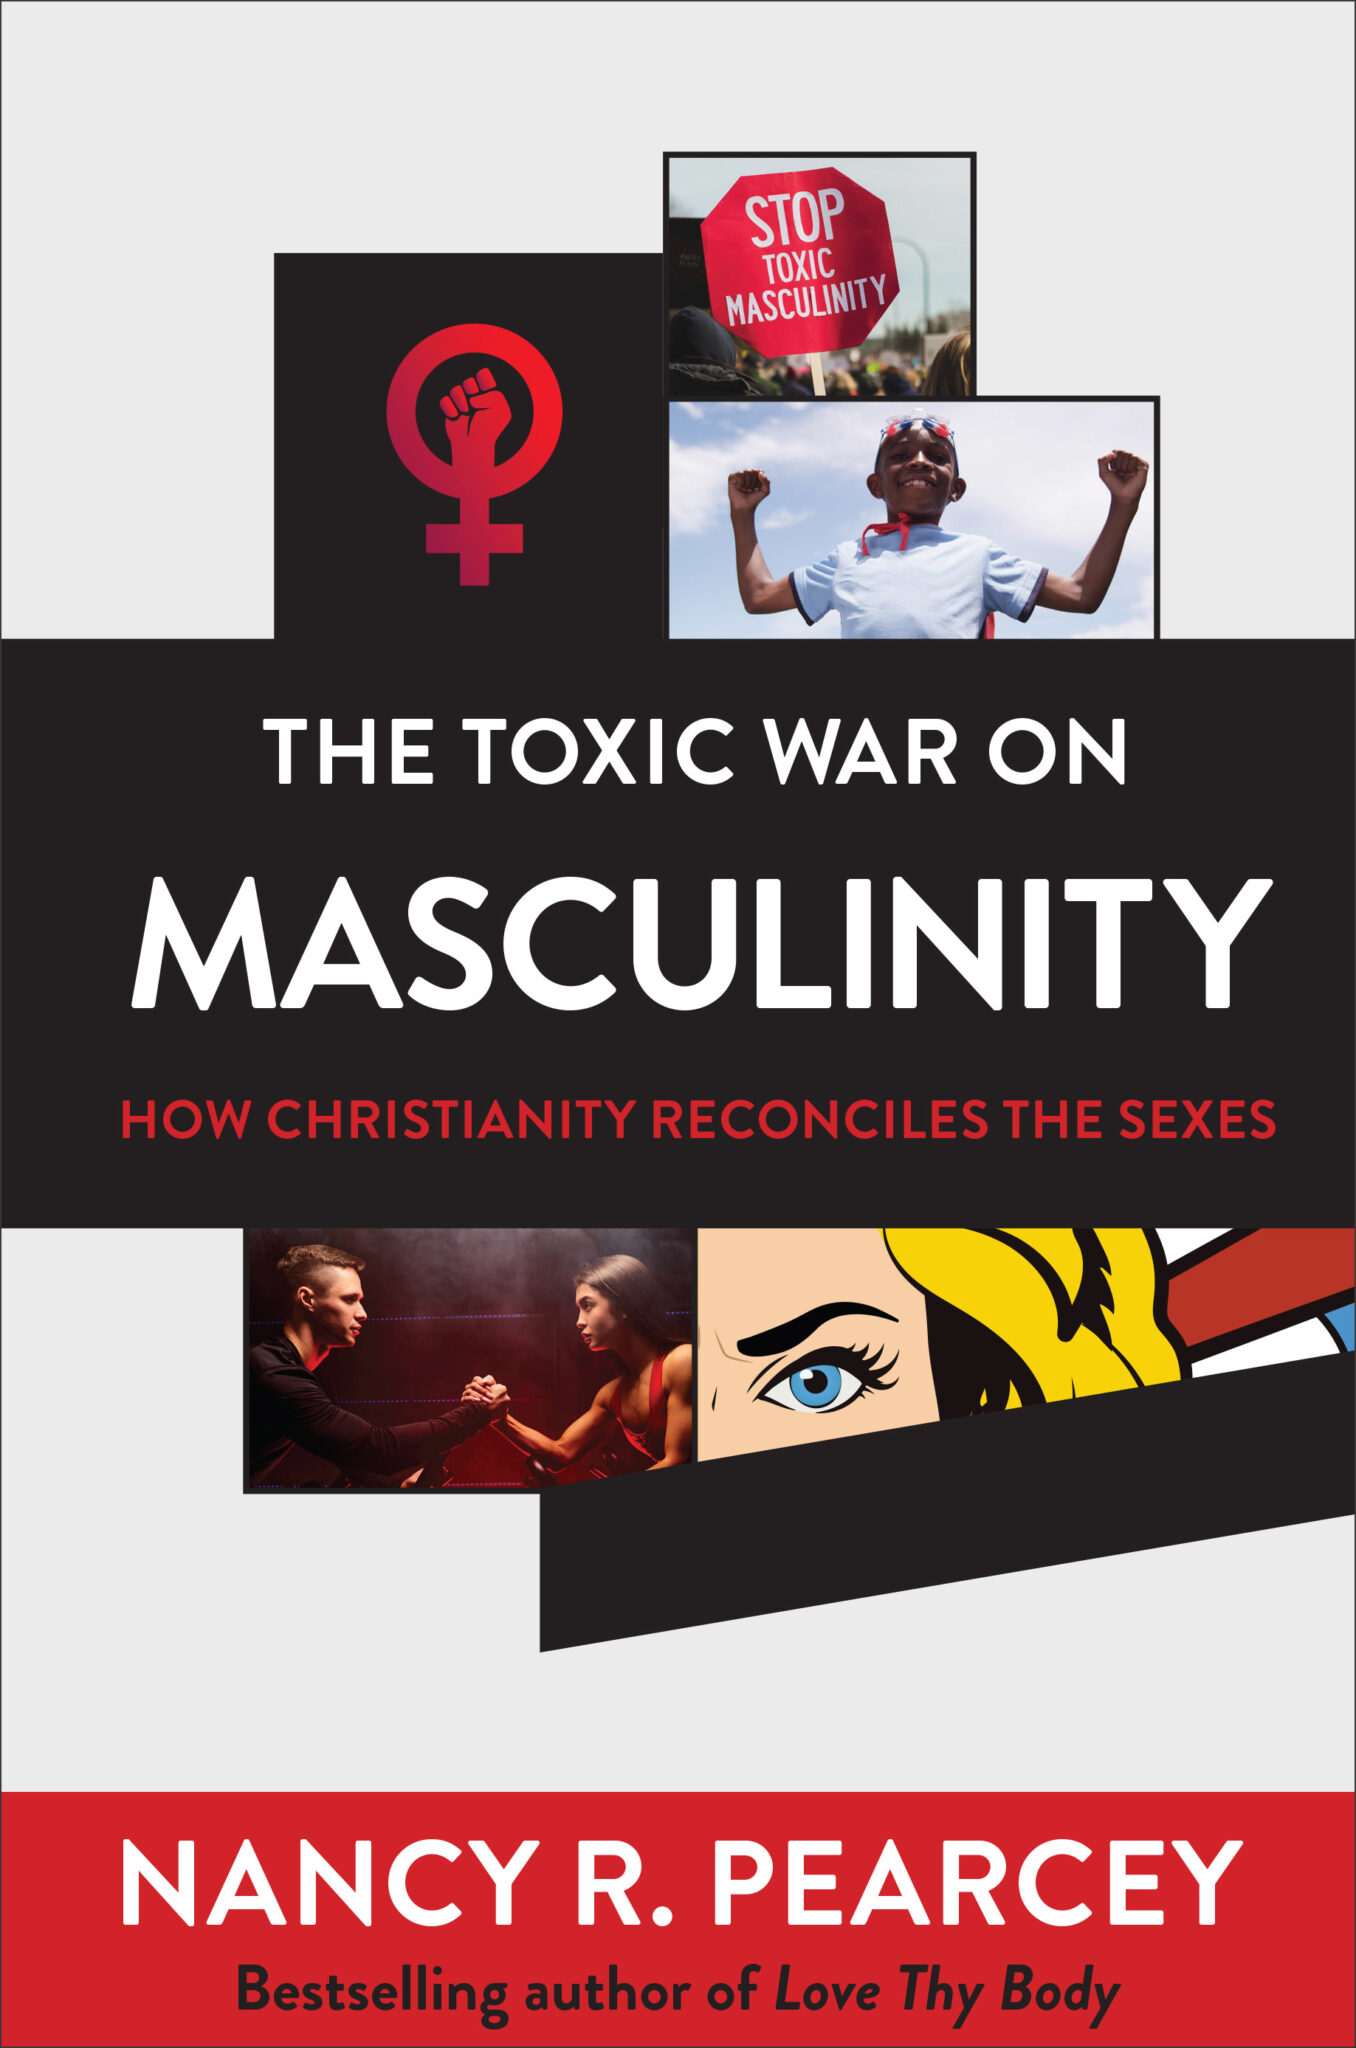 Review: The Toxic War Against Masculinity